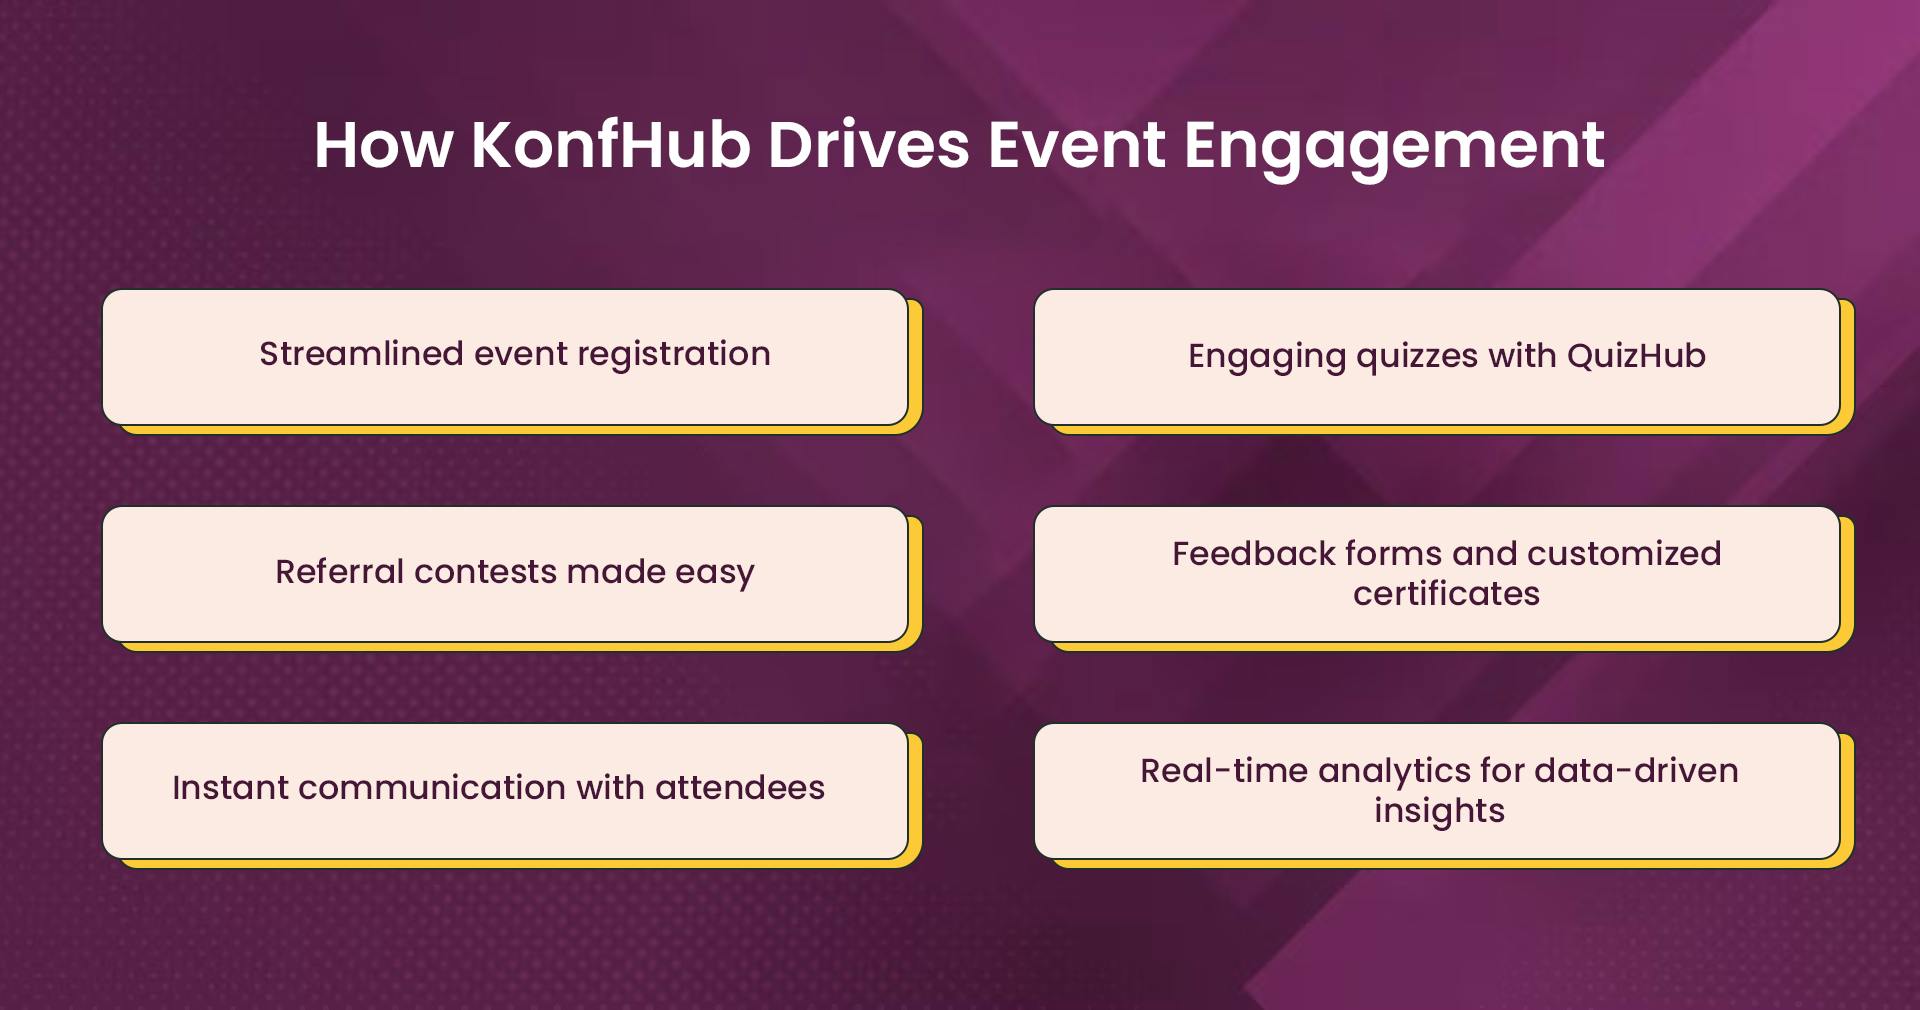 How KonfHub helps boost attendee experience